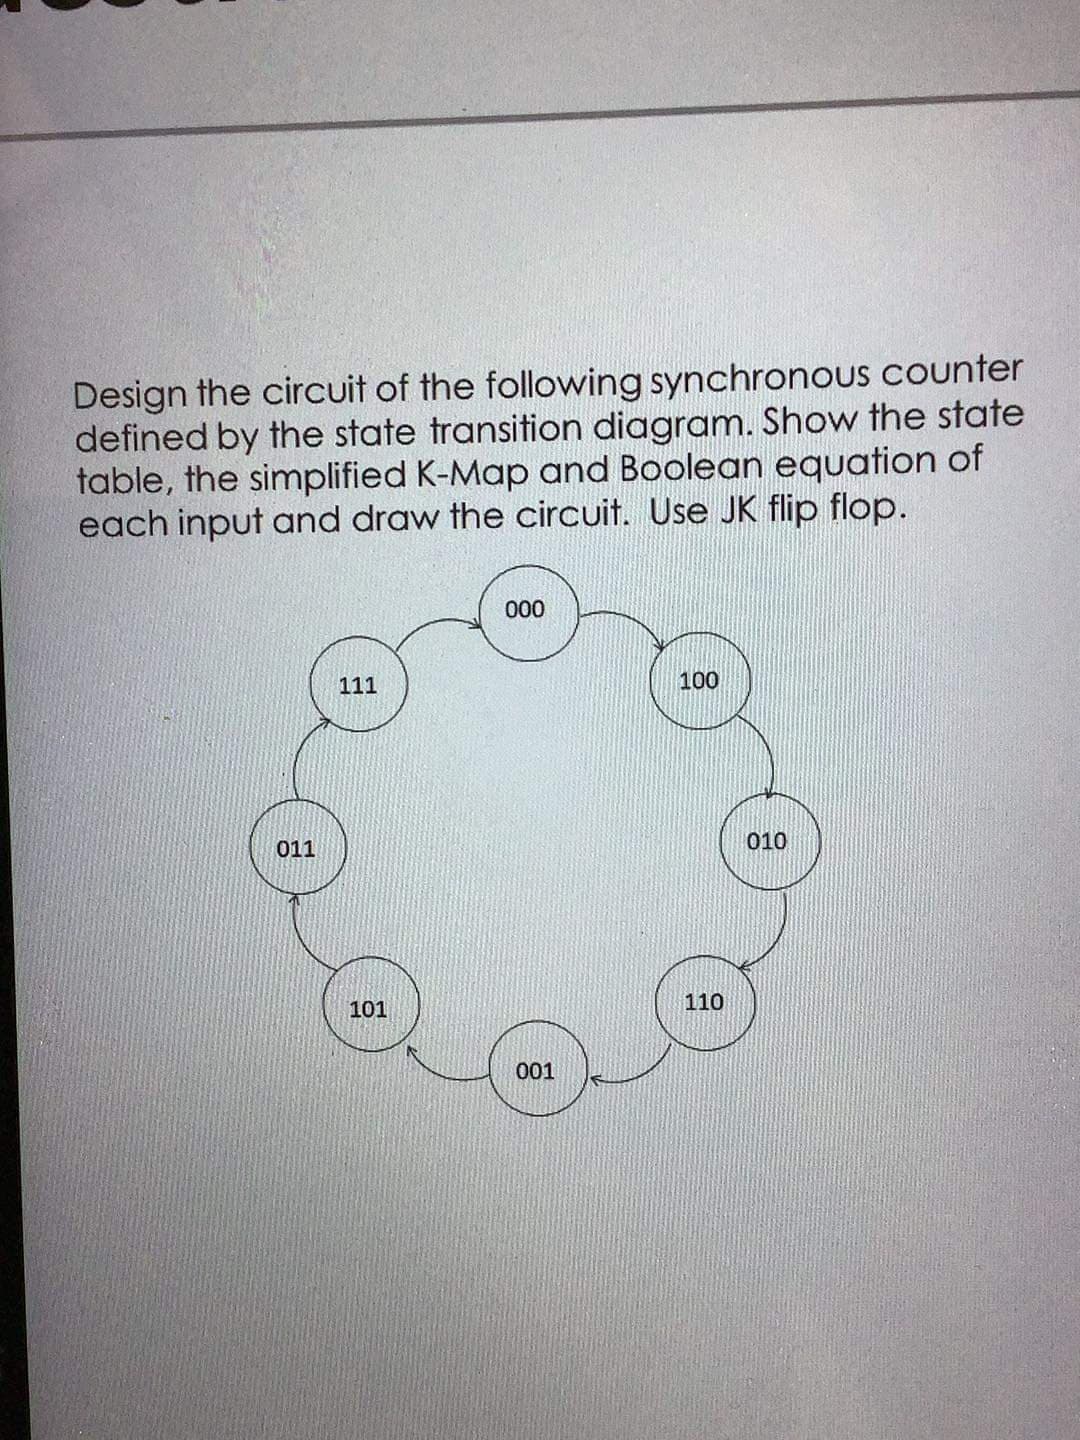 Design the circuit of the following synchronous Counter
defined by the state transition diagram. Show the state
table, the simplified K-Map and Boolean equation of
each input and draw the circuit. Use JK flip flop.
000
111
100
011
010
101
110
001
